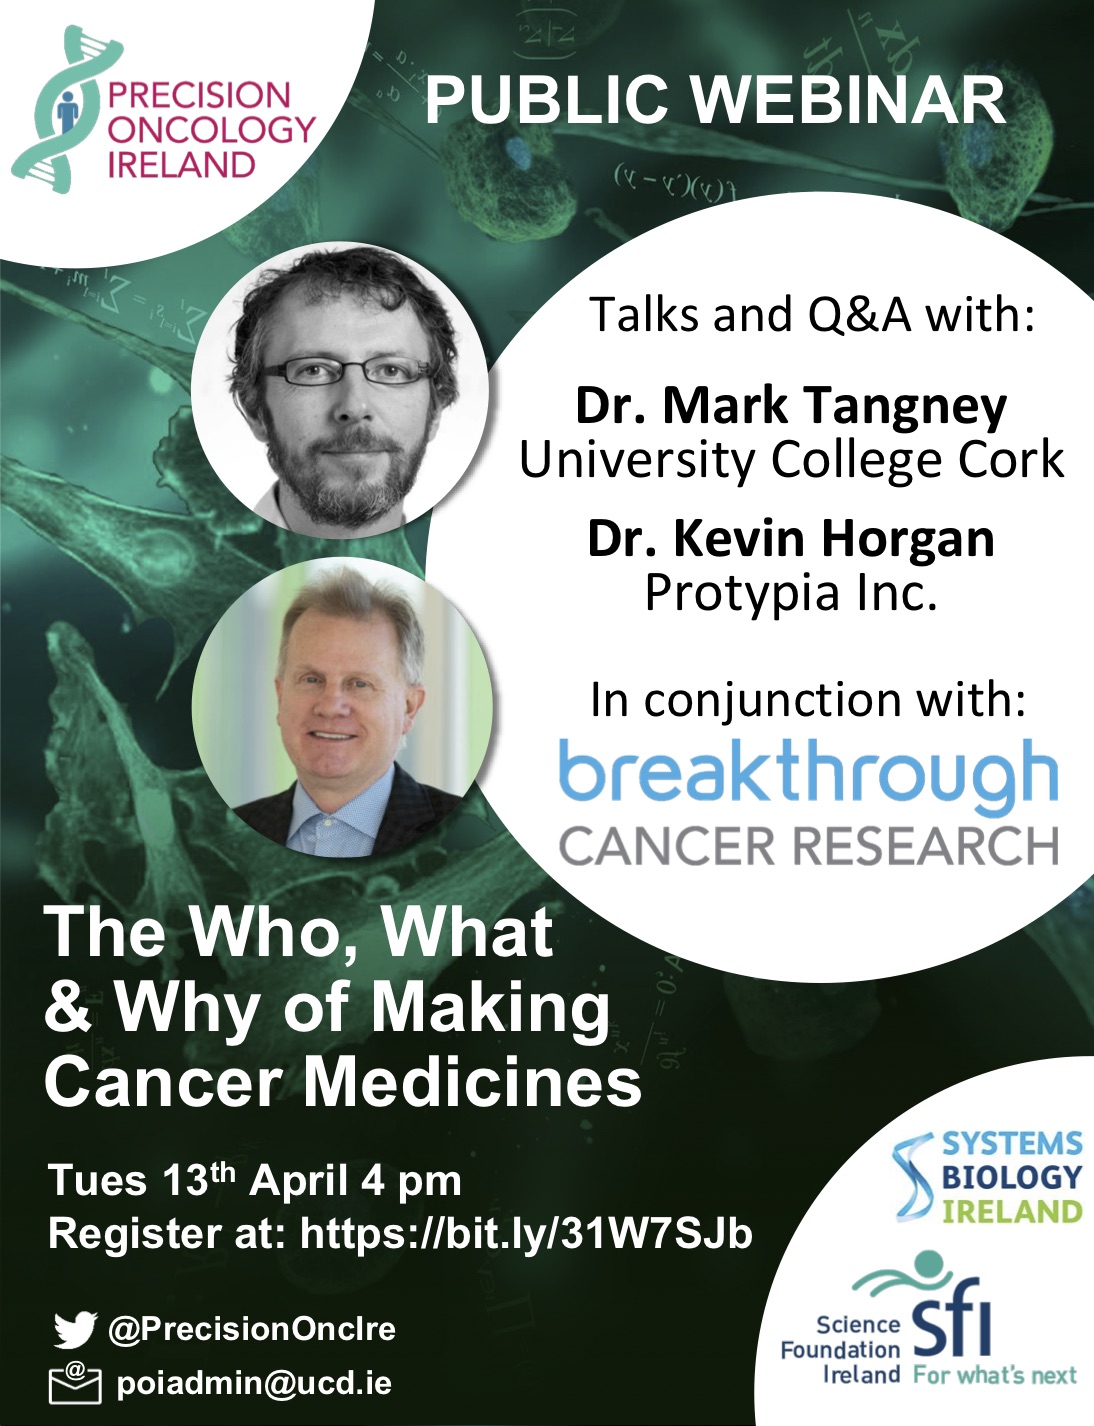 The Who, What, and Why of Making Cancer Medicines